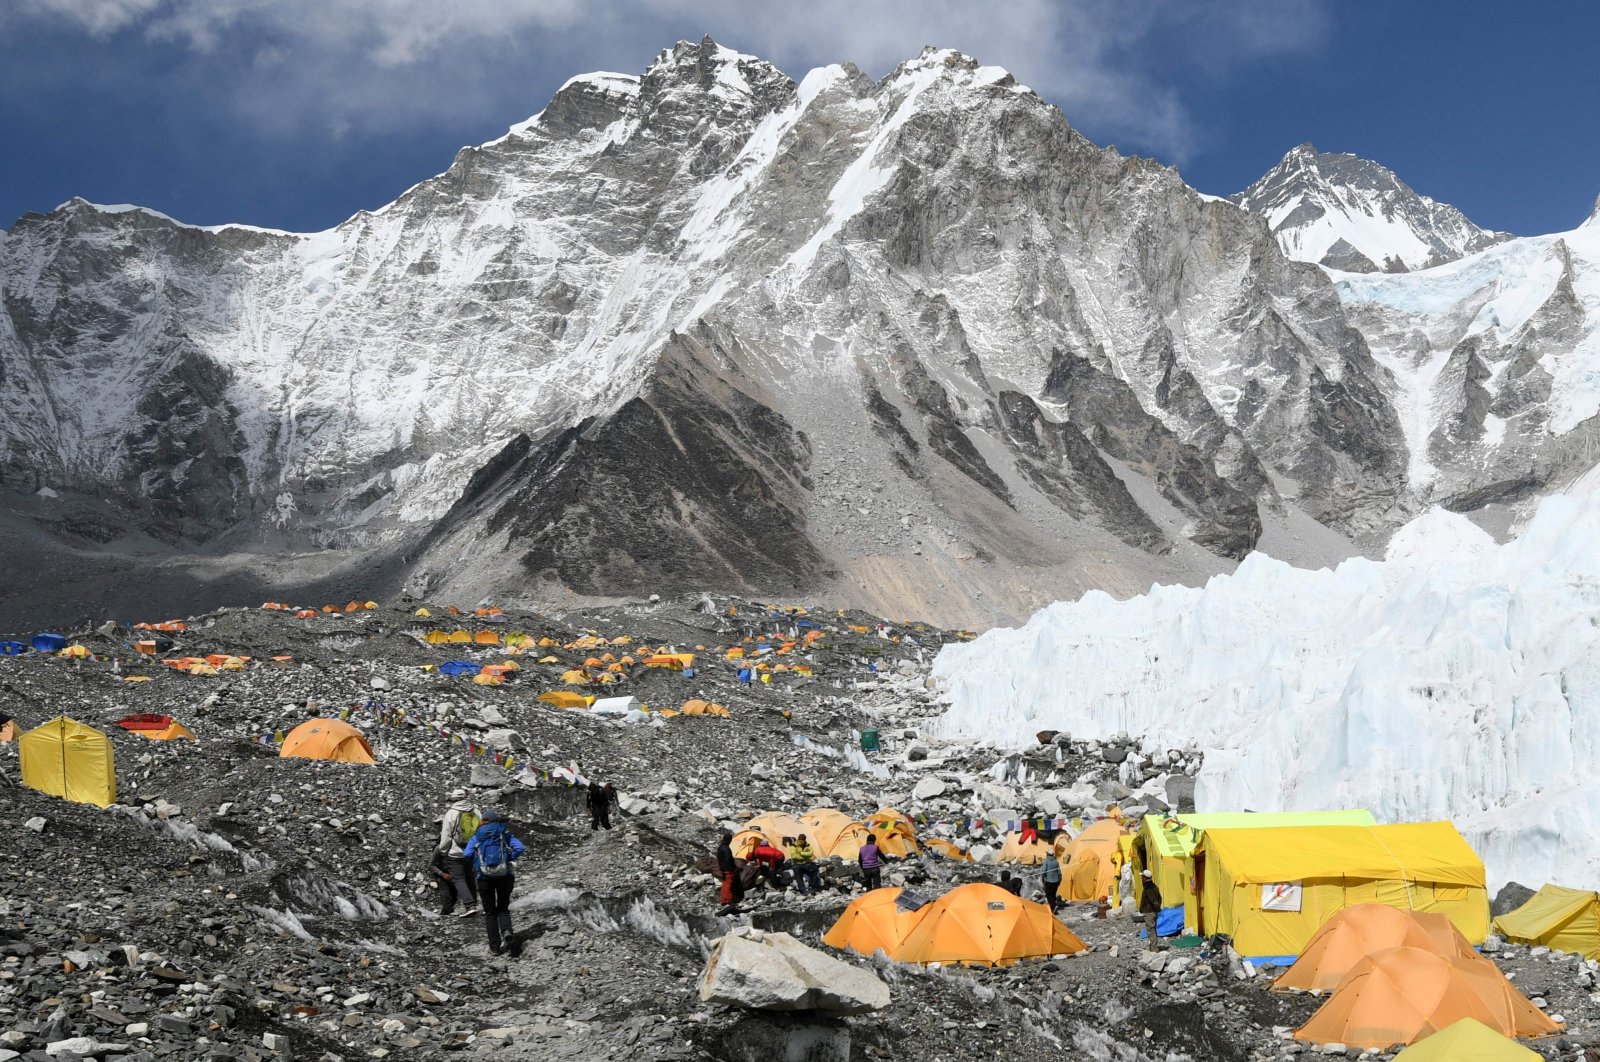  In this file photo taken on April 23, 2018, climbers and porters are seen by their tents at Everest base camp, some 140 kilometres northeast of Kathmandu. (AFP Photo)